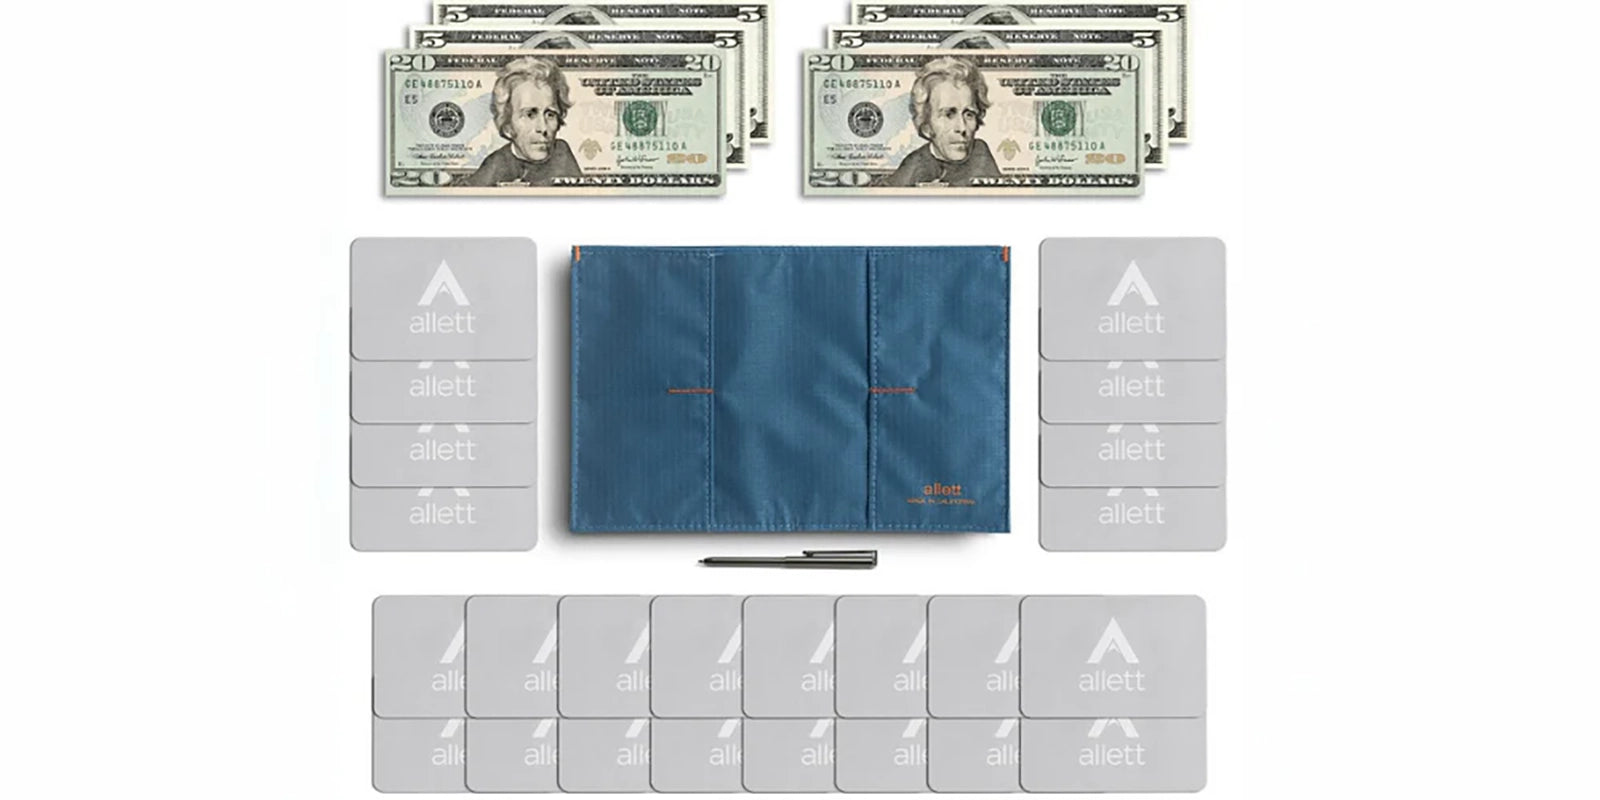 Allett Original Wallet in Indigo Blue, info graphic detailing how many cards fit inside